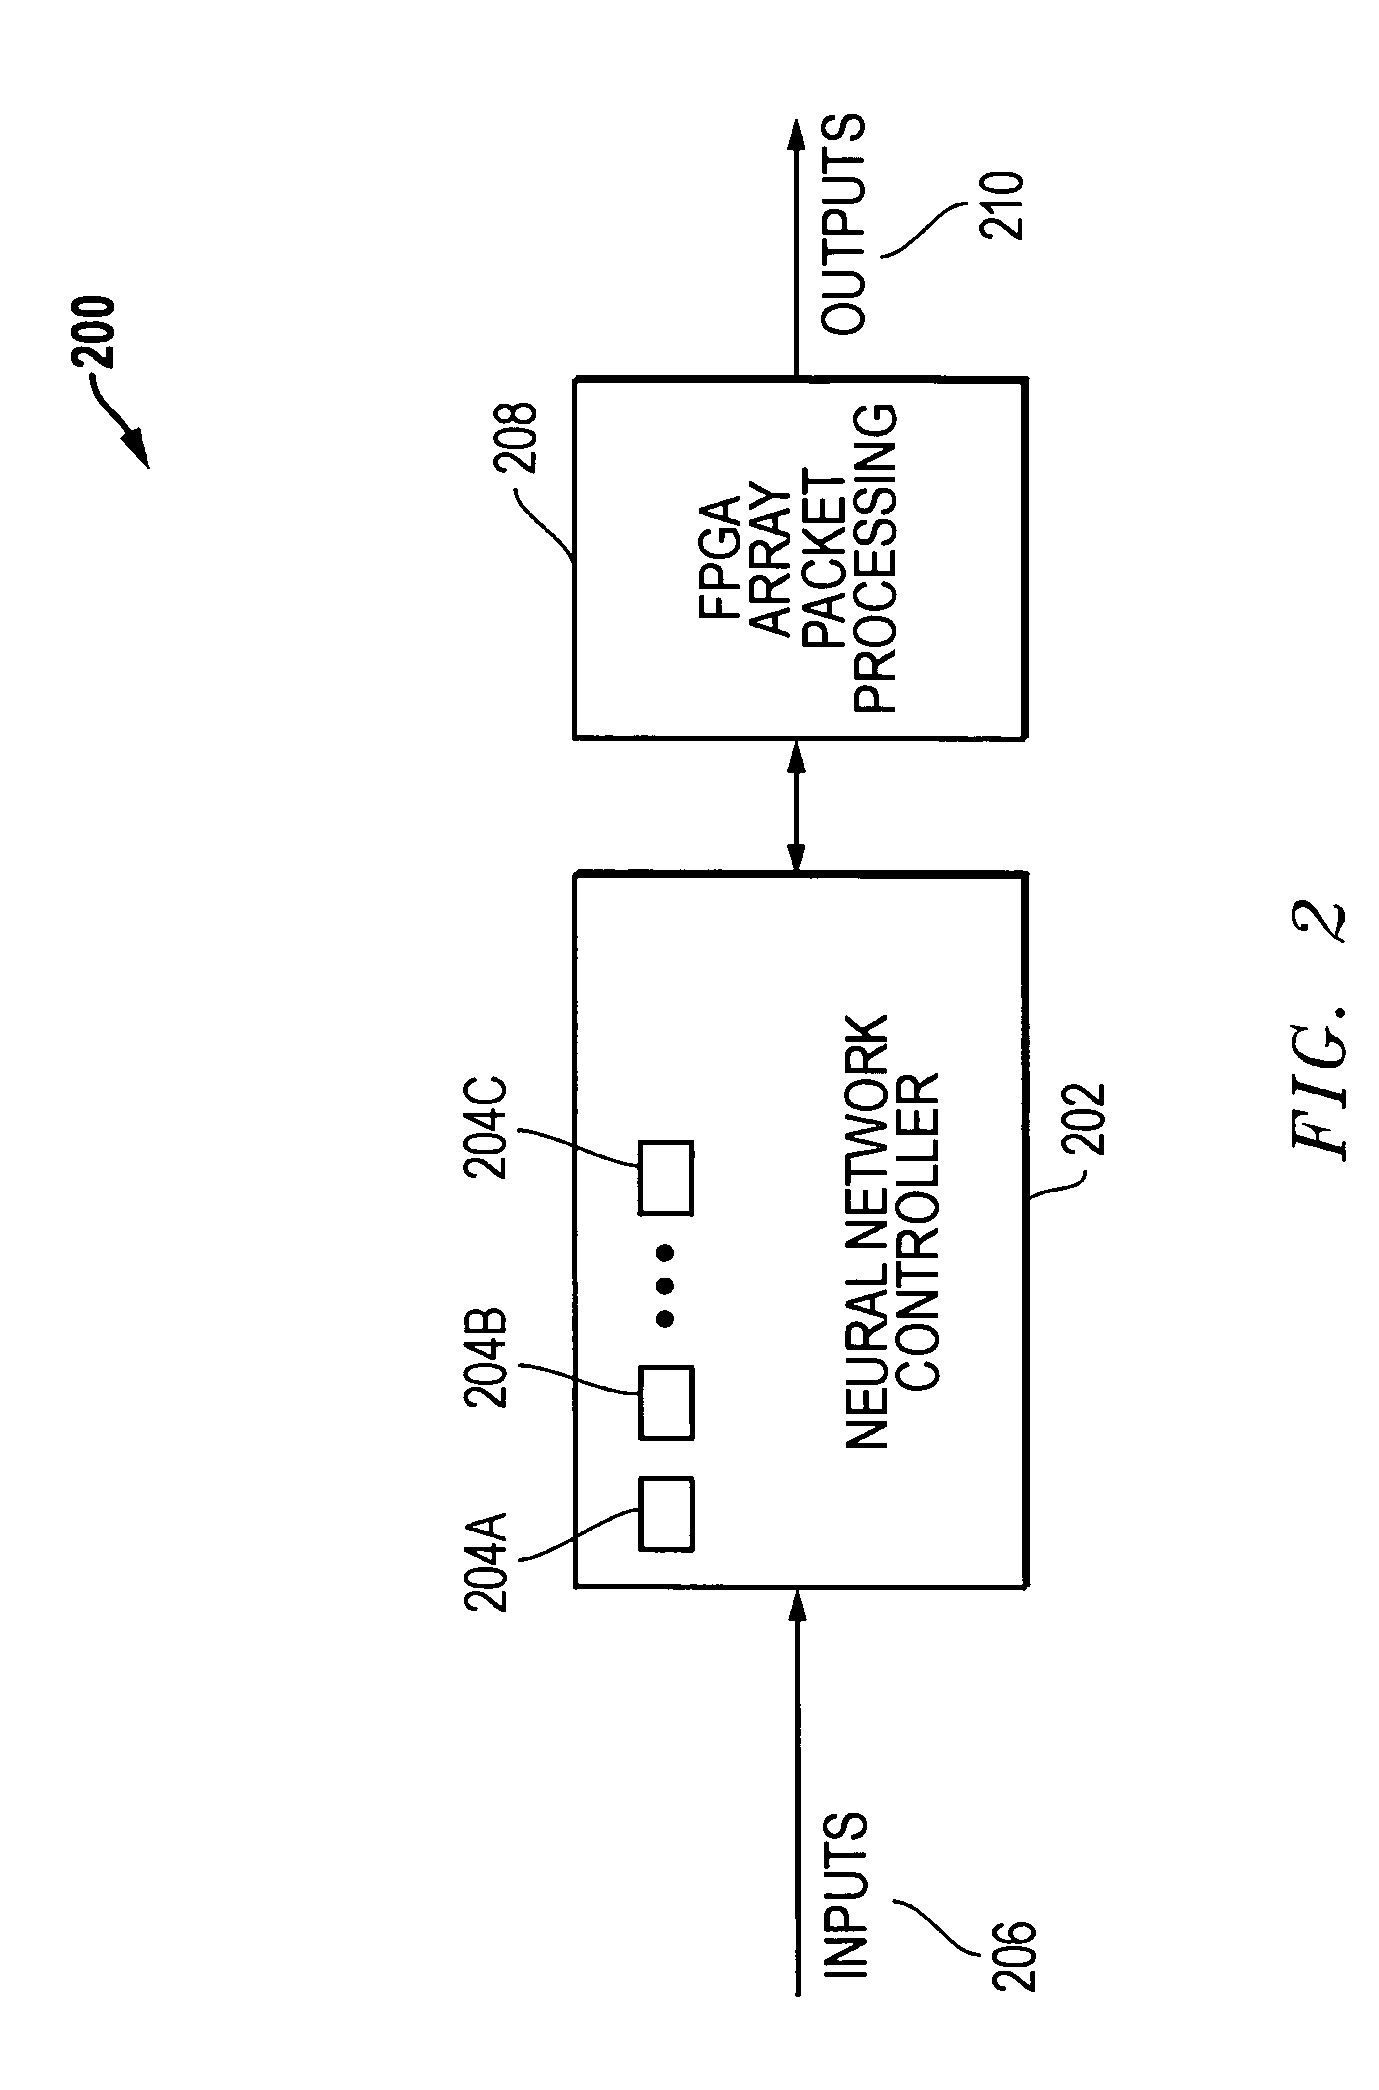 Reconfigurable neural network systems and methods utilizing FPGAs having packet routers